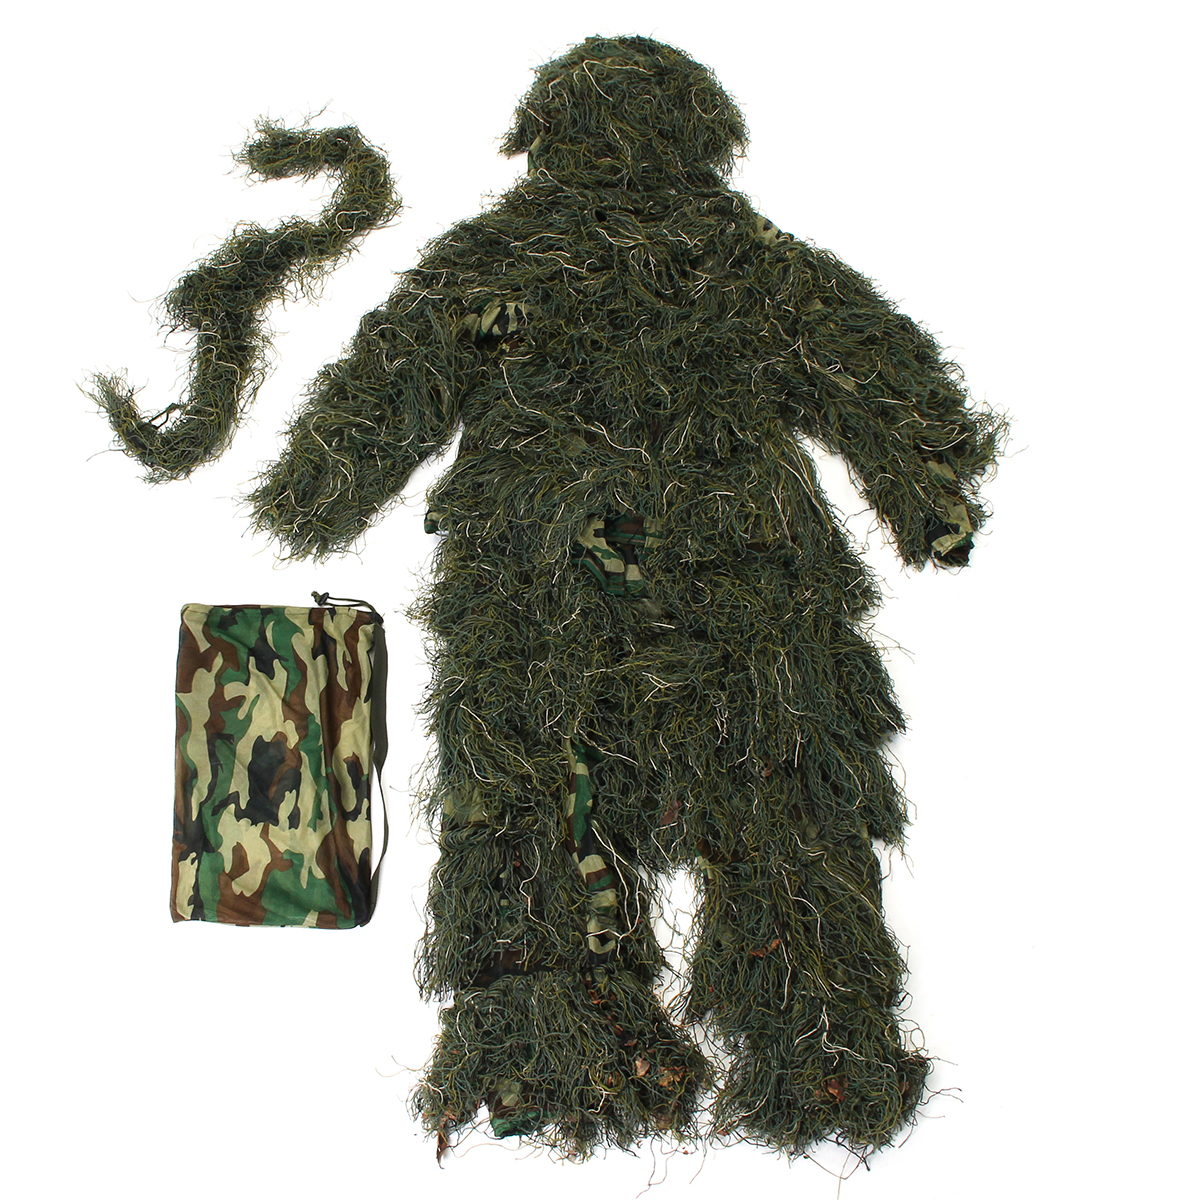 Adult Ghillie Suit 3D Camo Woodland Outdoor Camouflage Jungle Hunting 5pcs Set